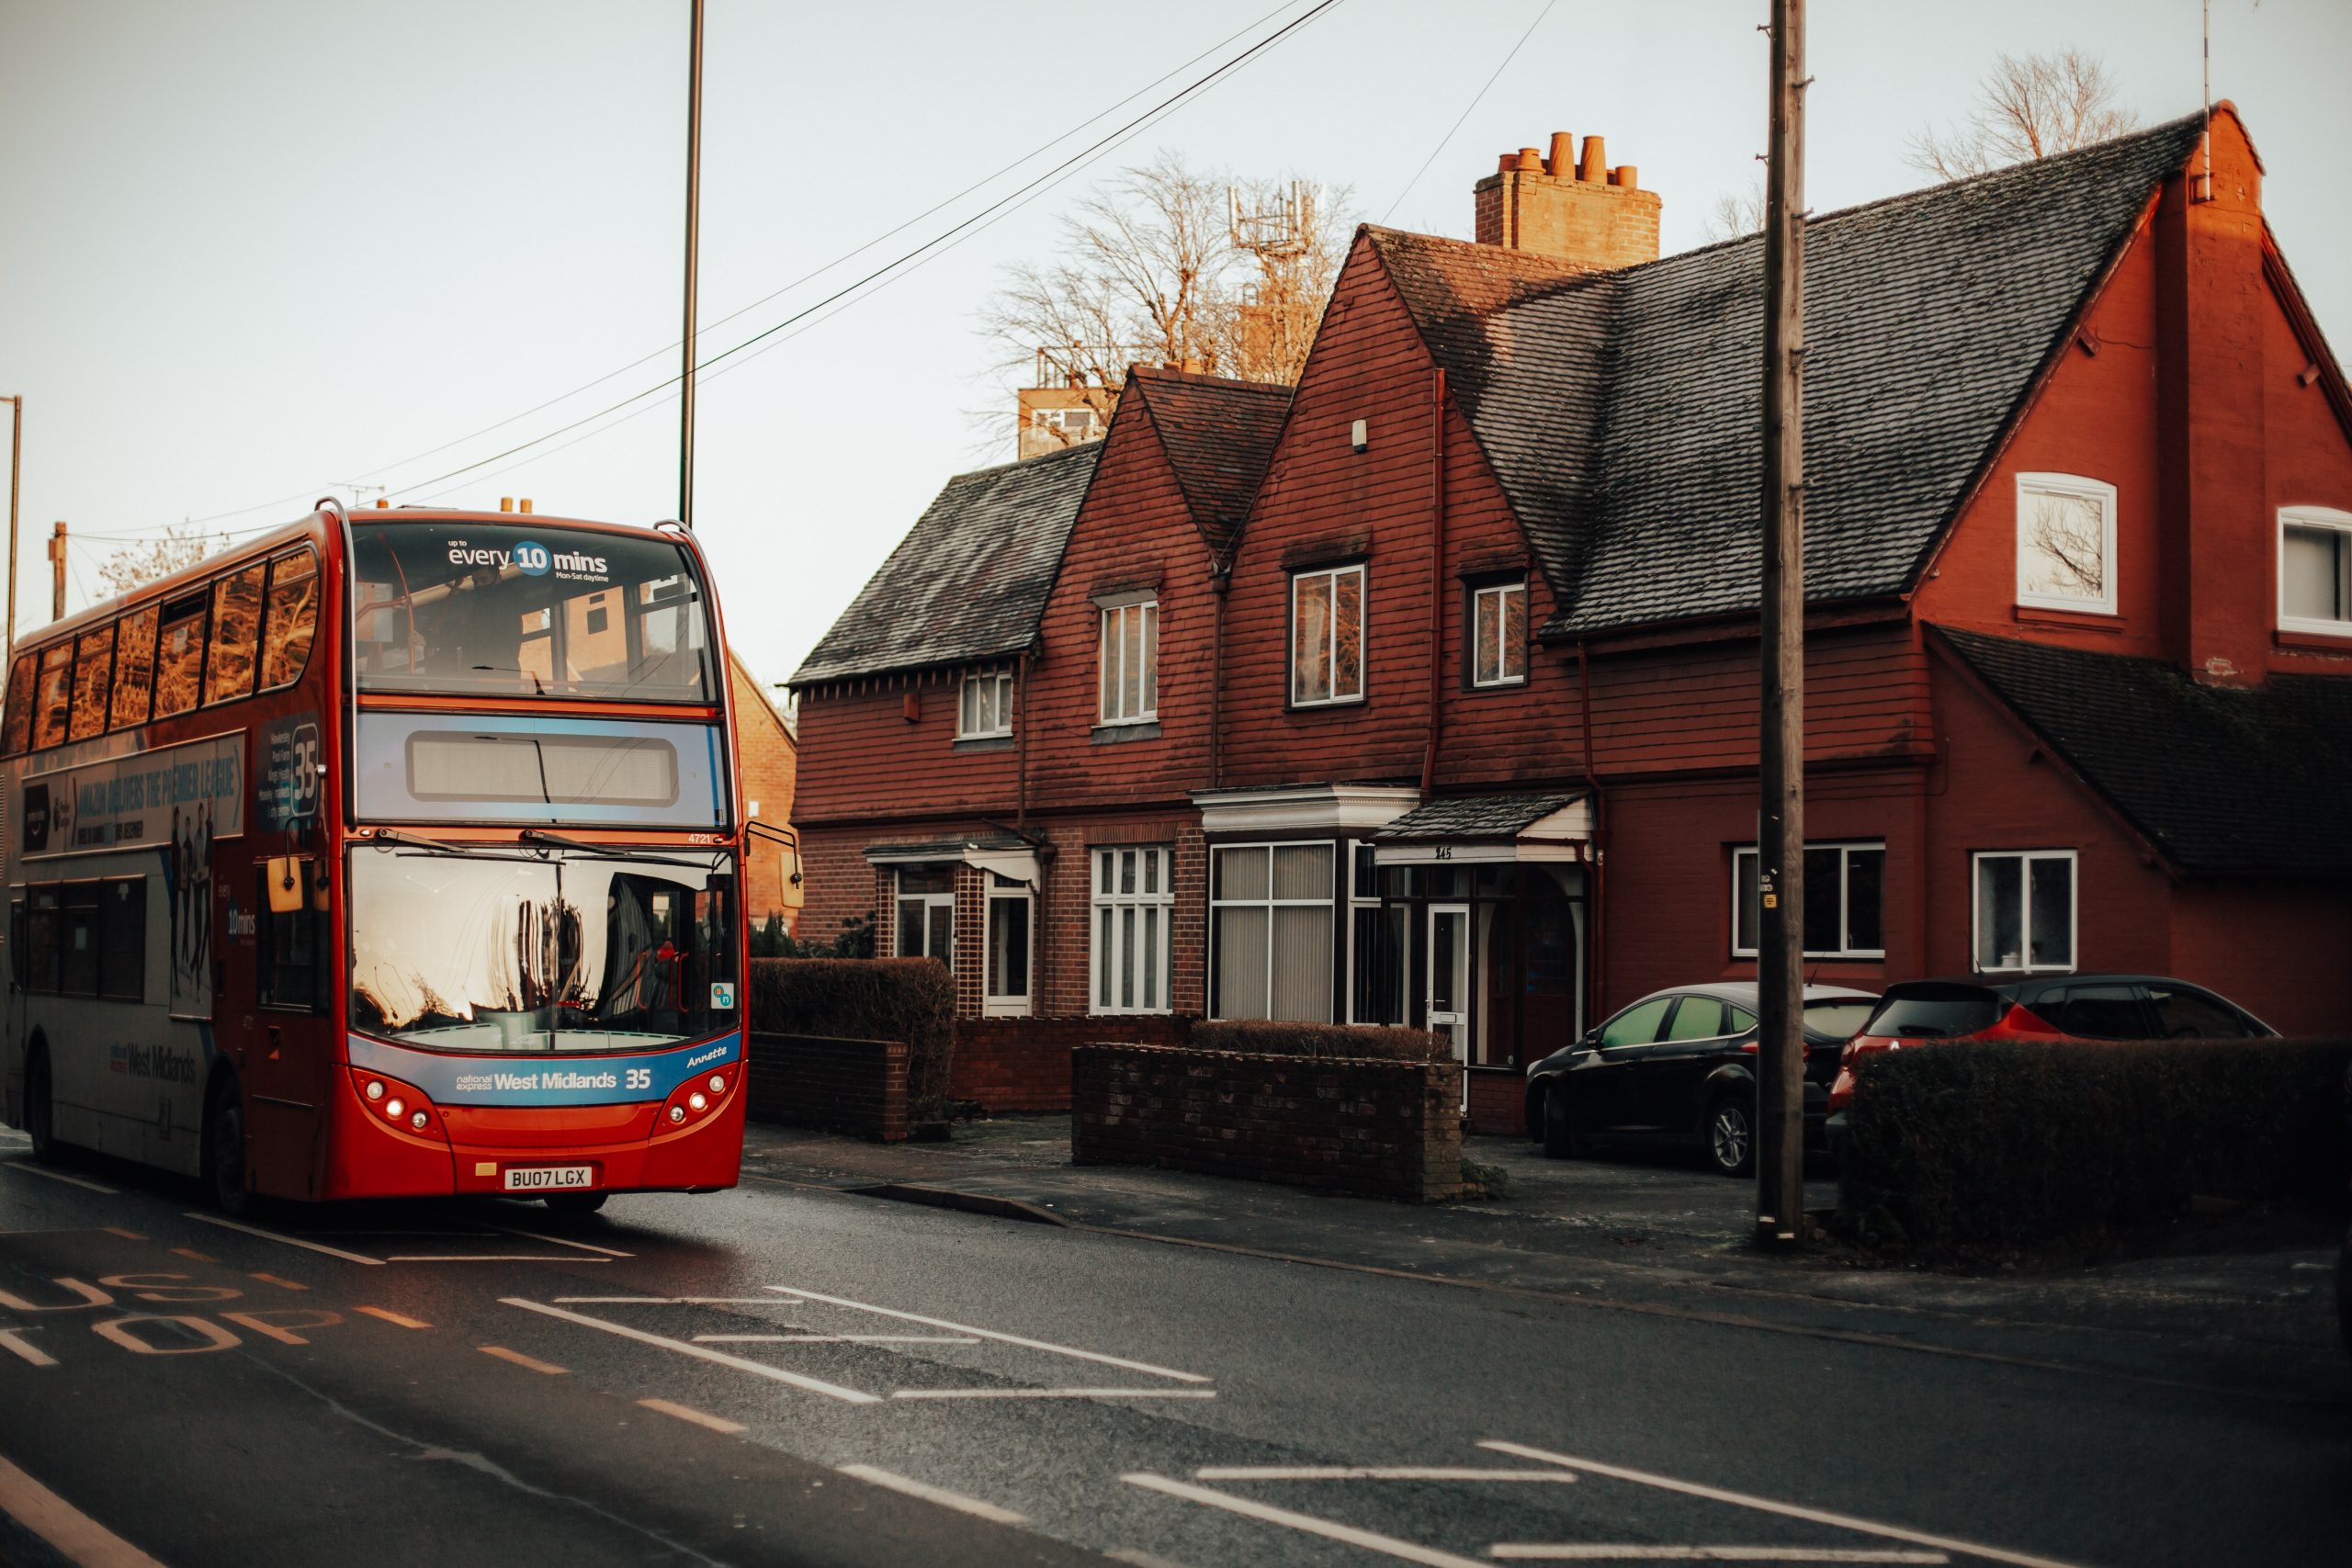 £2 Bus Fare Cap: A boon for communities and another step towards modal shift